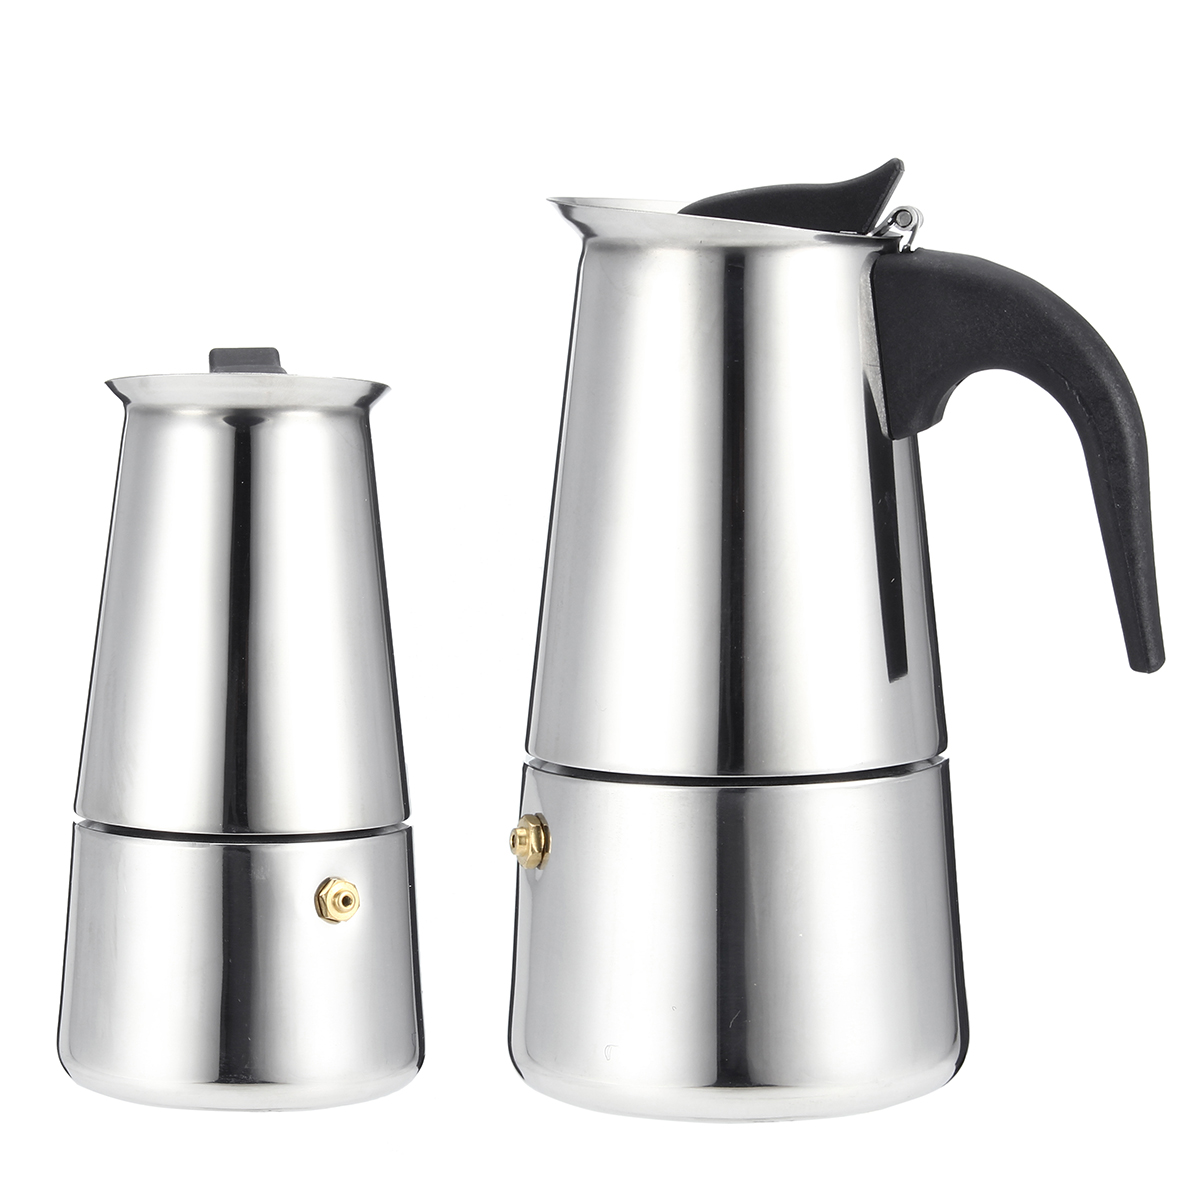 Espresso Moka Coffee Maker Pot Percolator Stainless Steel Electric Stove Electric Coffee Kettle 25